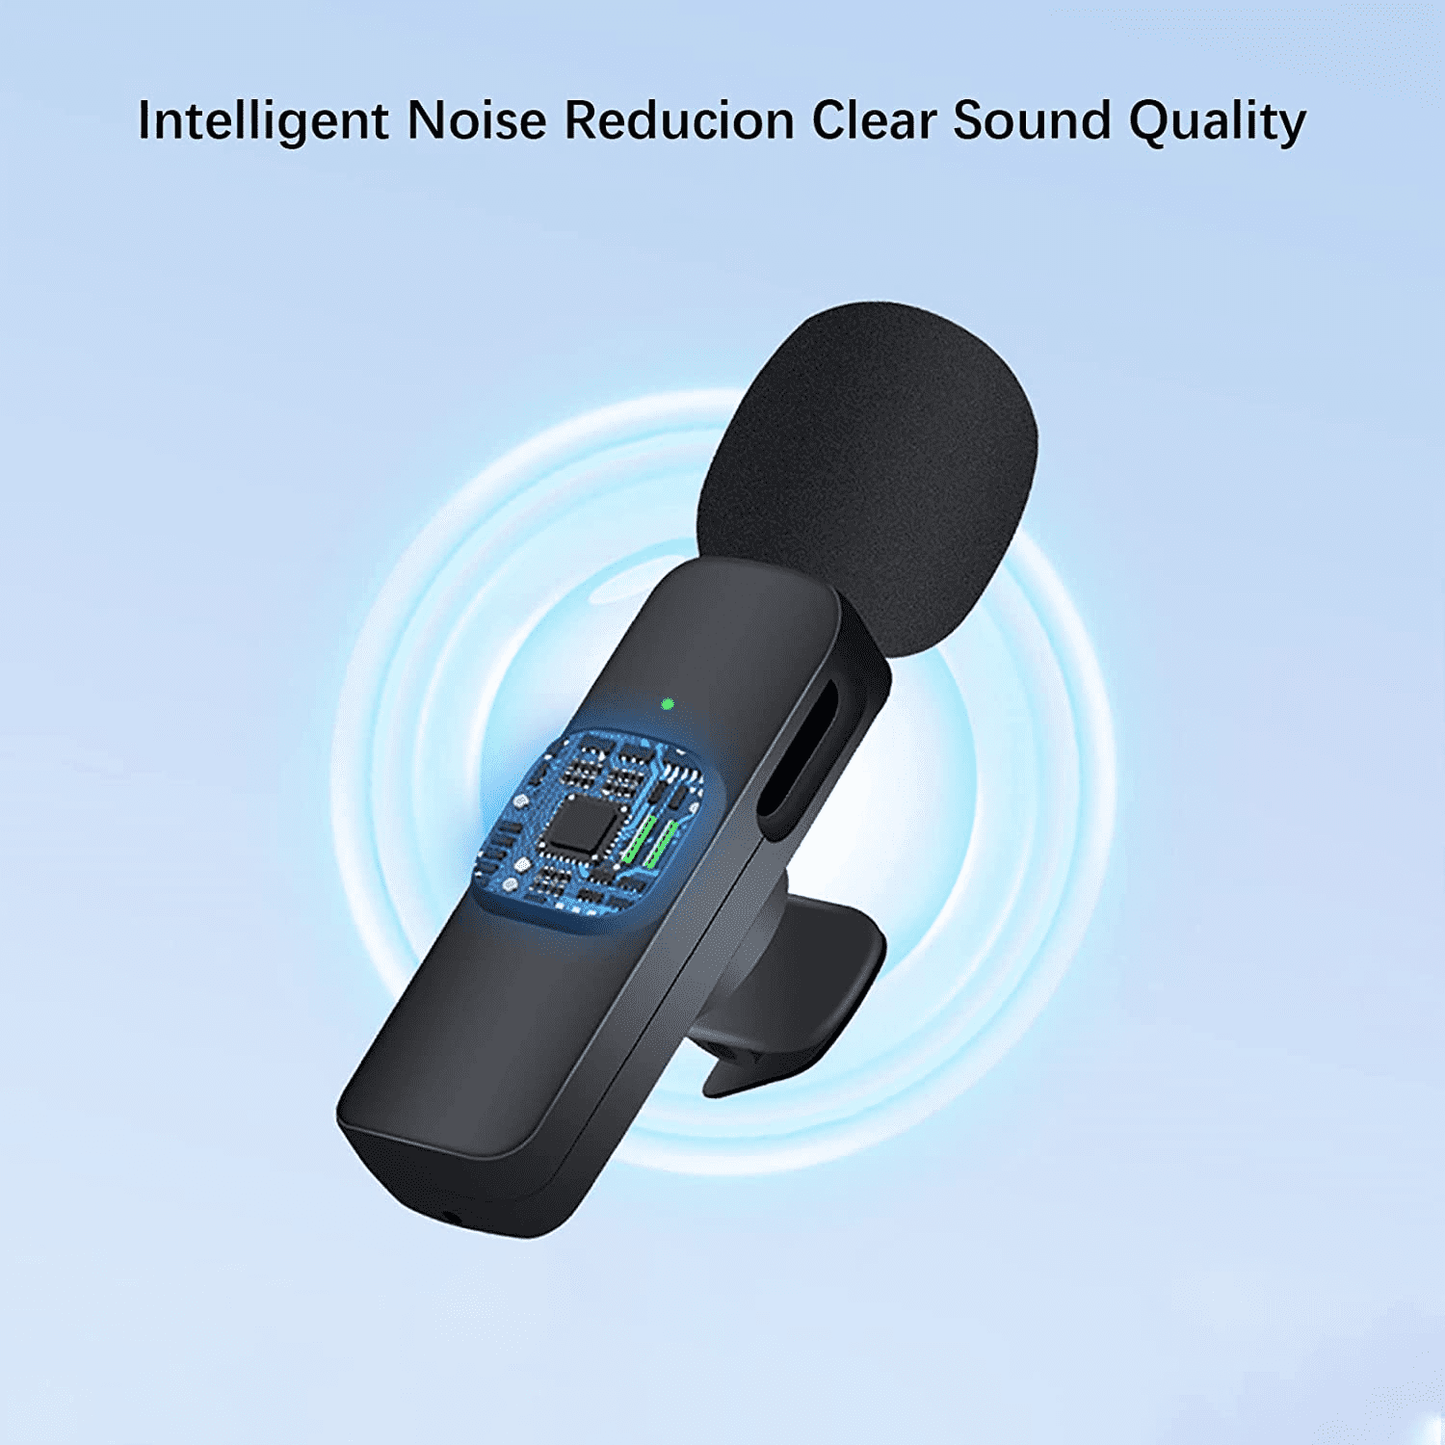 Wireless Lavalier Microphone Mic For Android Phone iPhone IOS Vlog Live Stream